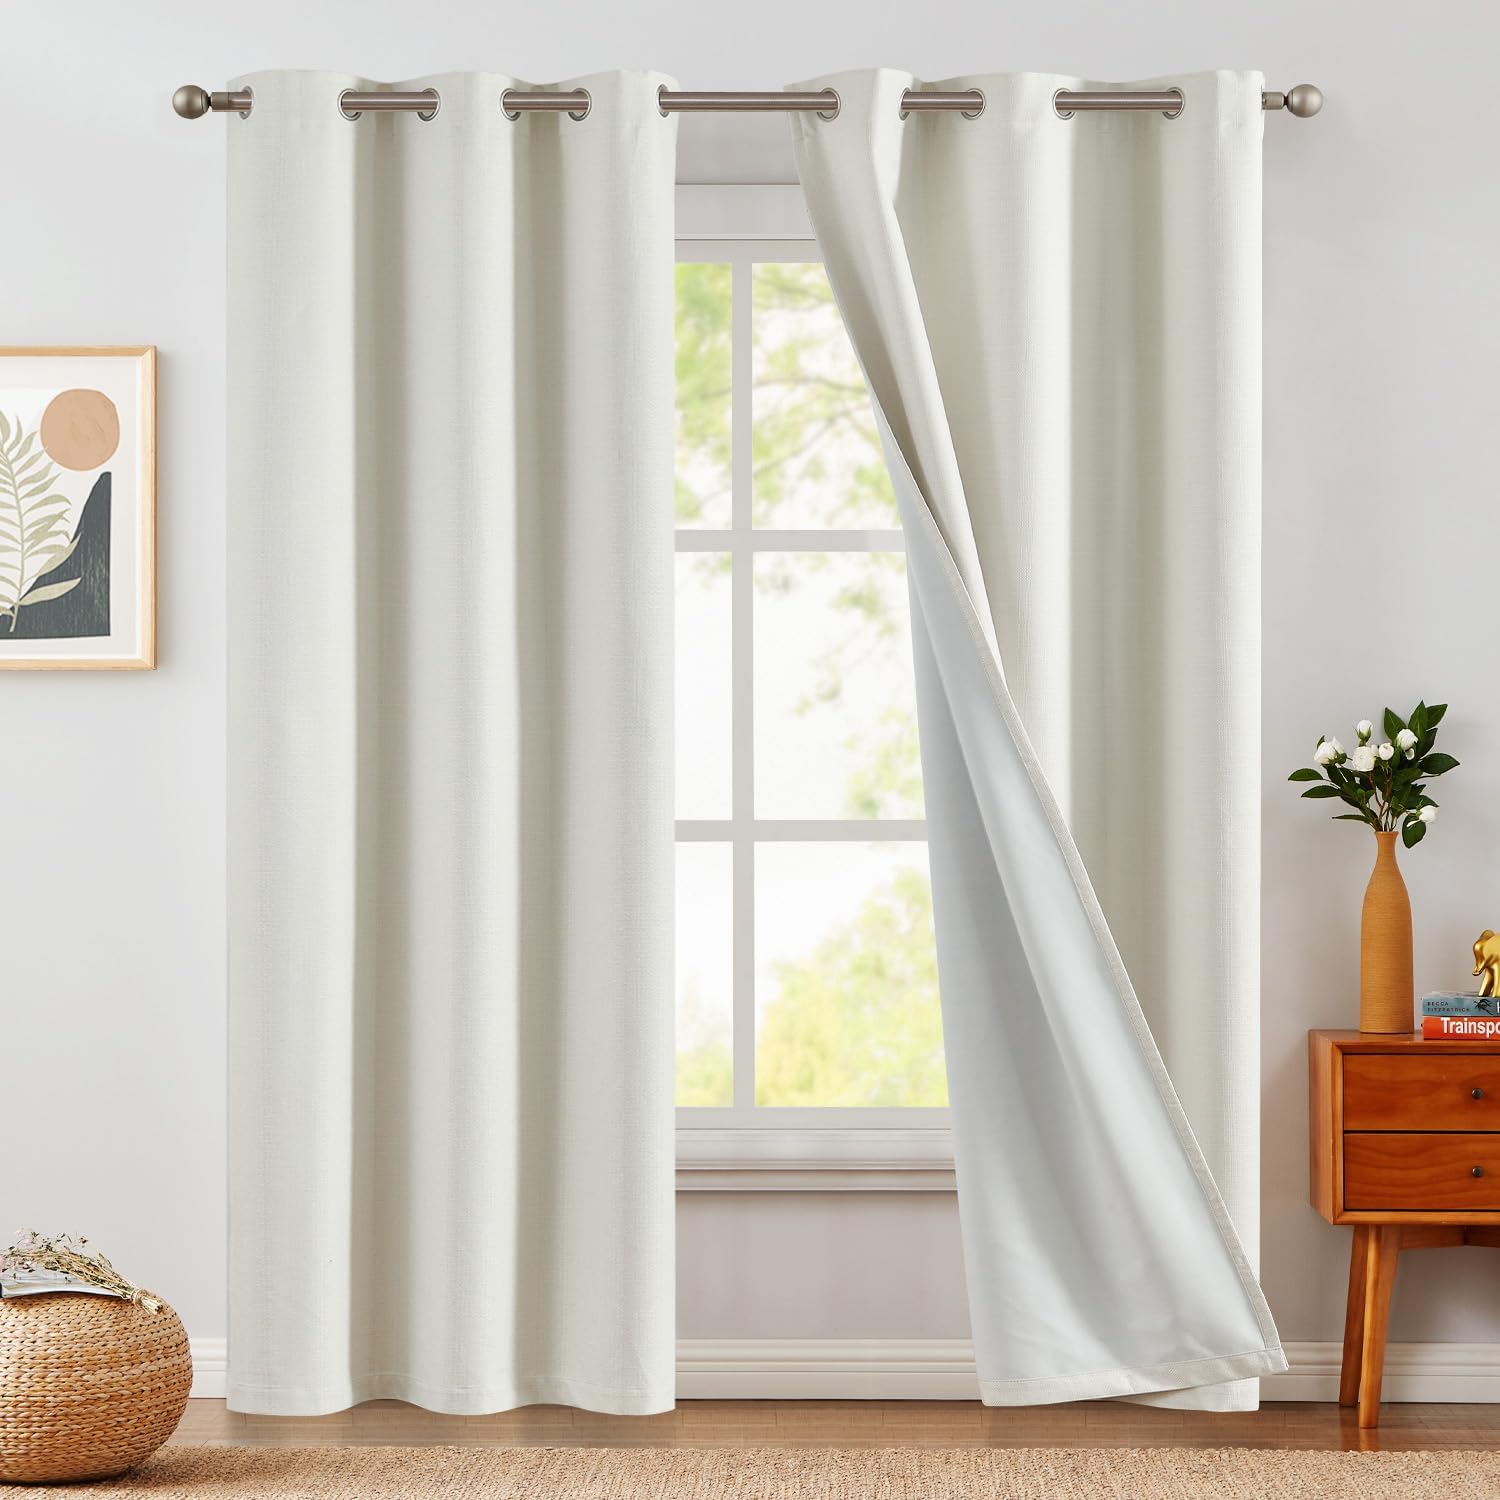 jinchan Room Darkening Curtains 84 Inches Long for [...]